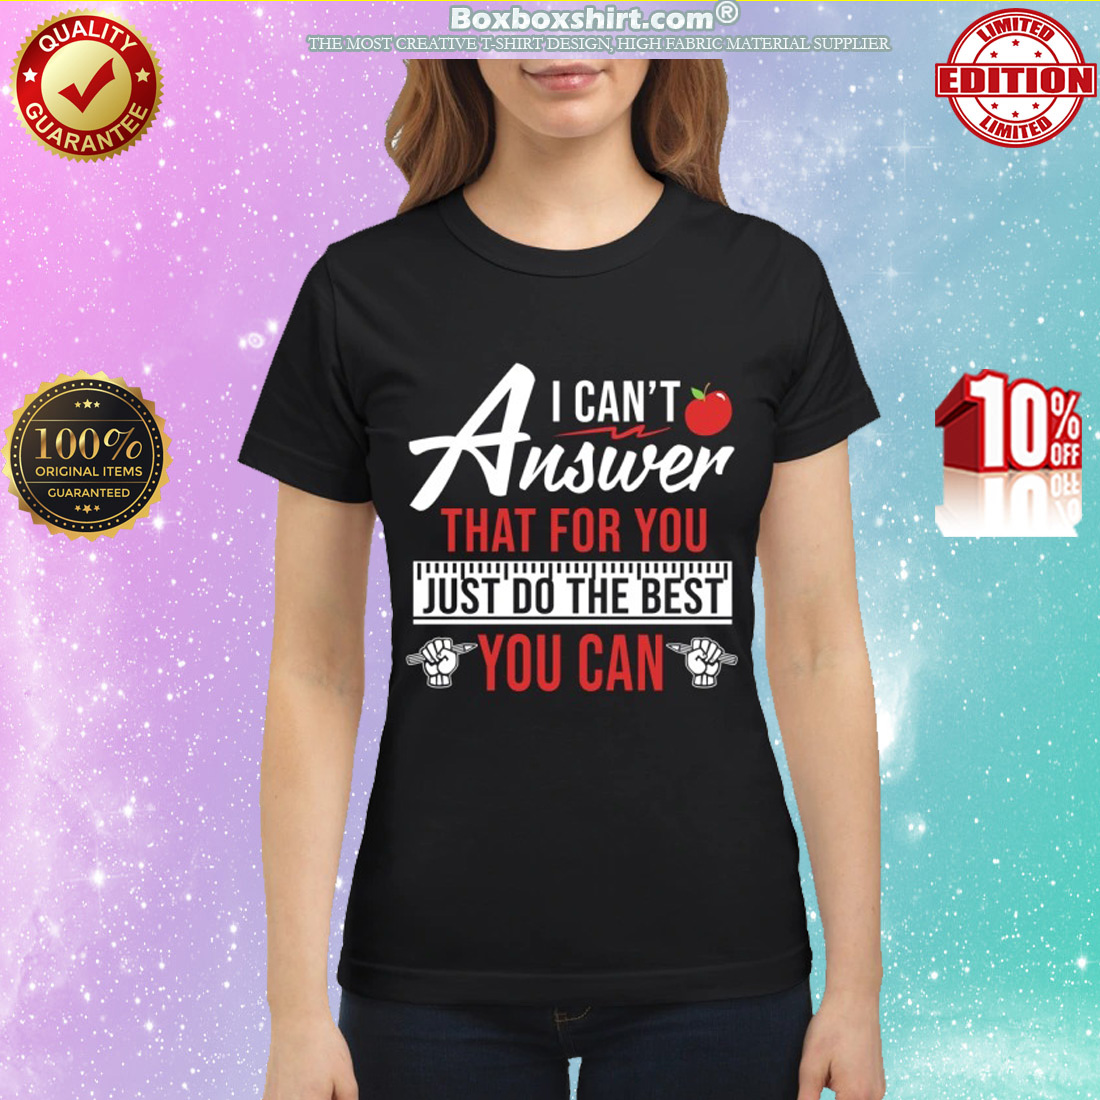 I can't answer that for you just do the best you can classic shirt